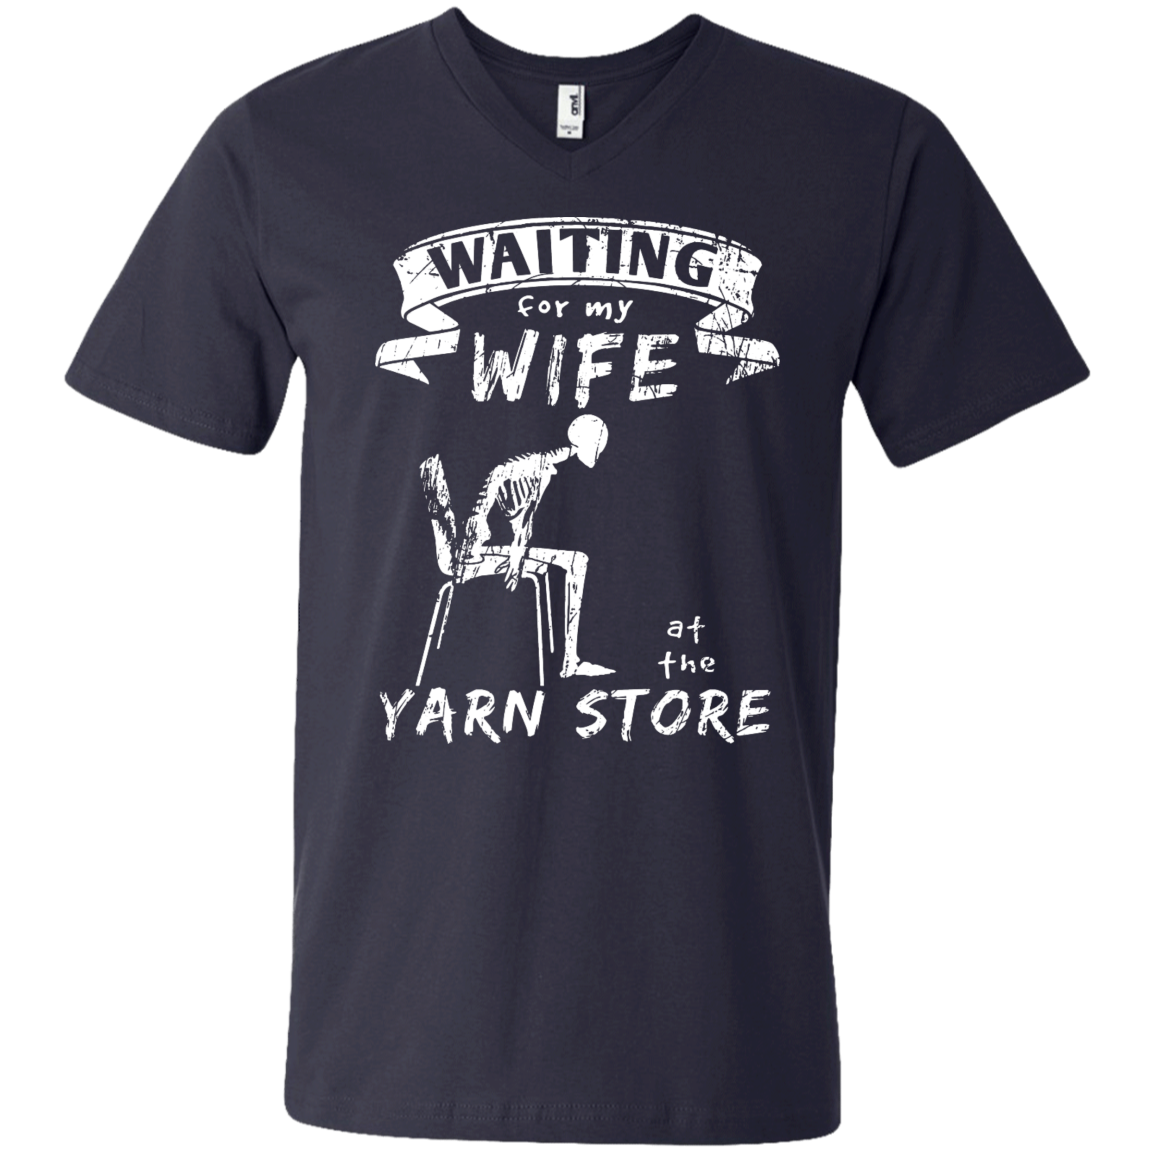 Waiting at the Yarn Store Men's and Unisex T-Shirts - Crafter4Life - 6